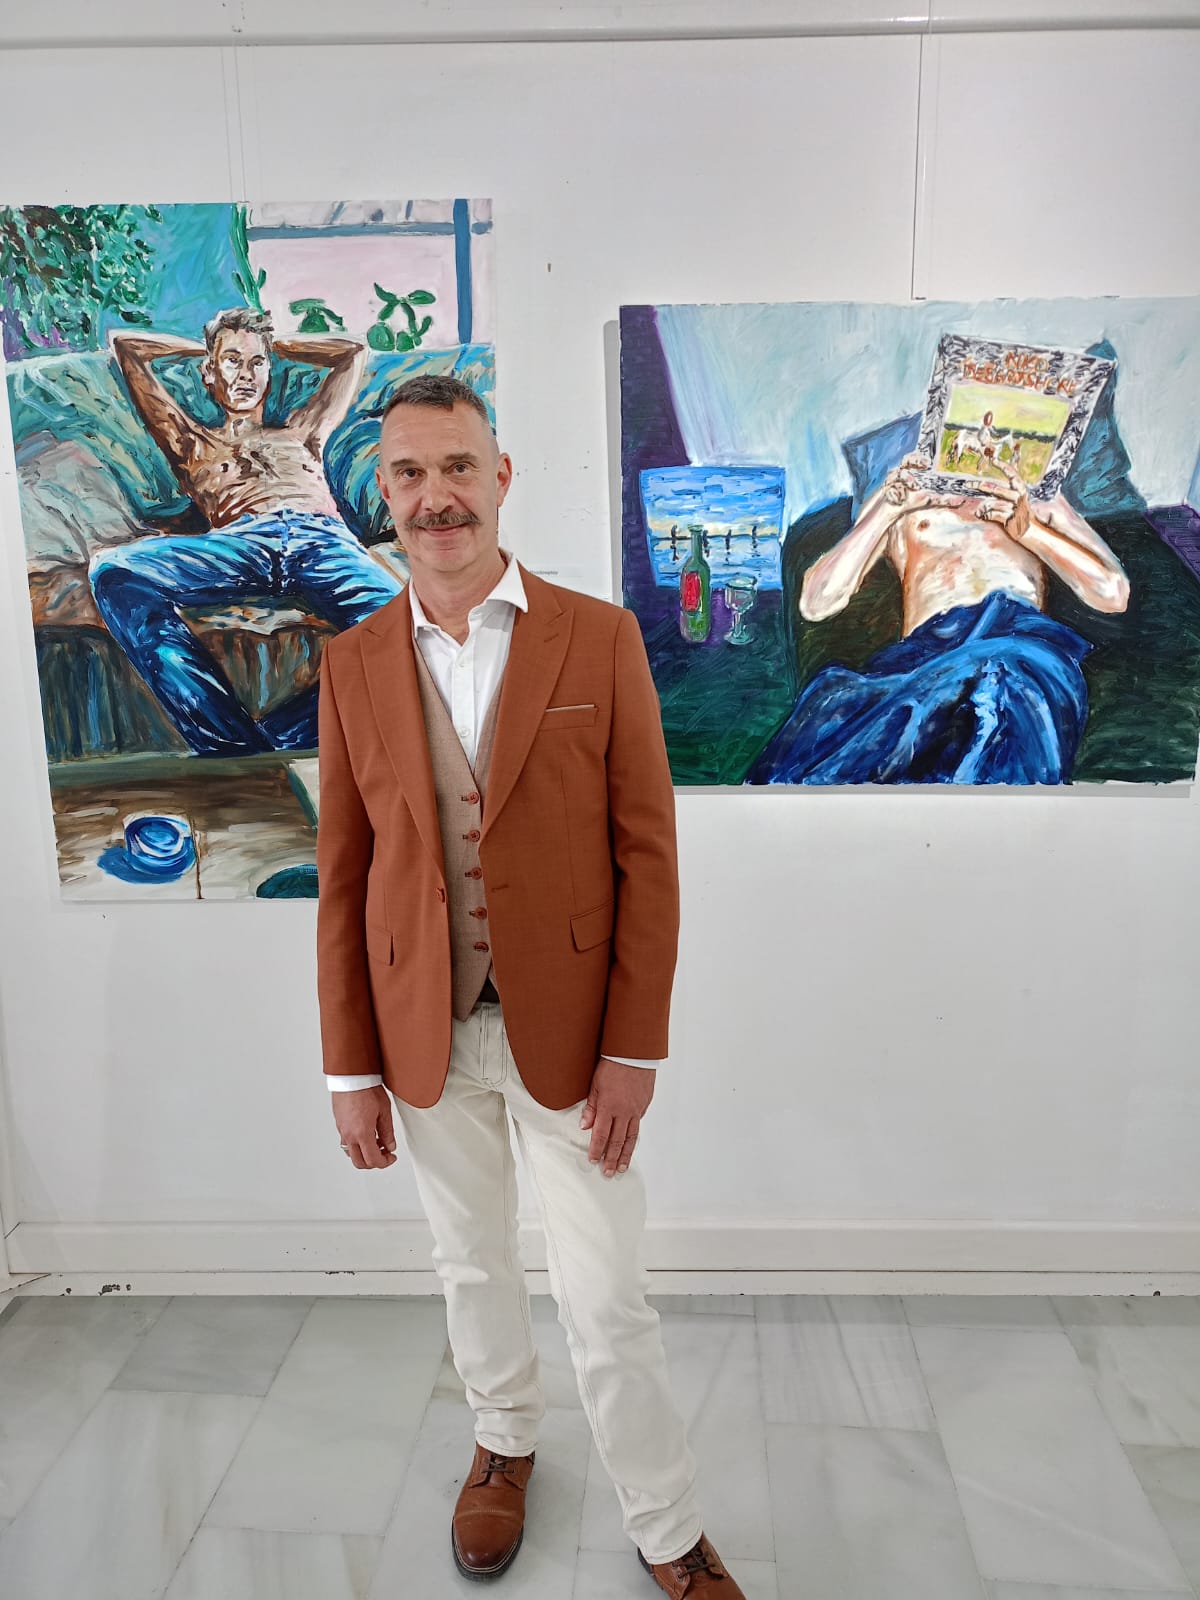 The “La Fuente” Municipal Art Gallery has opened its doors to the exhibition by the artist Frank Notteboom where, until the 26th of May you can admire this painter’s works created from 2020 to 2023.